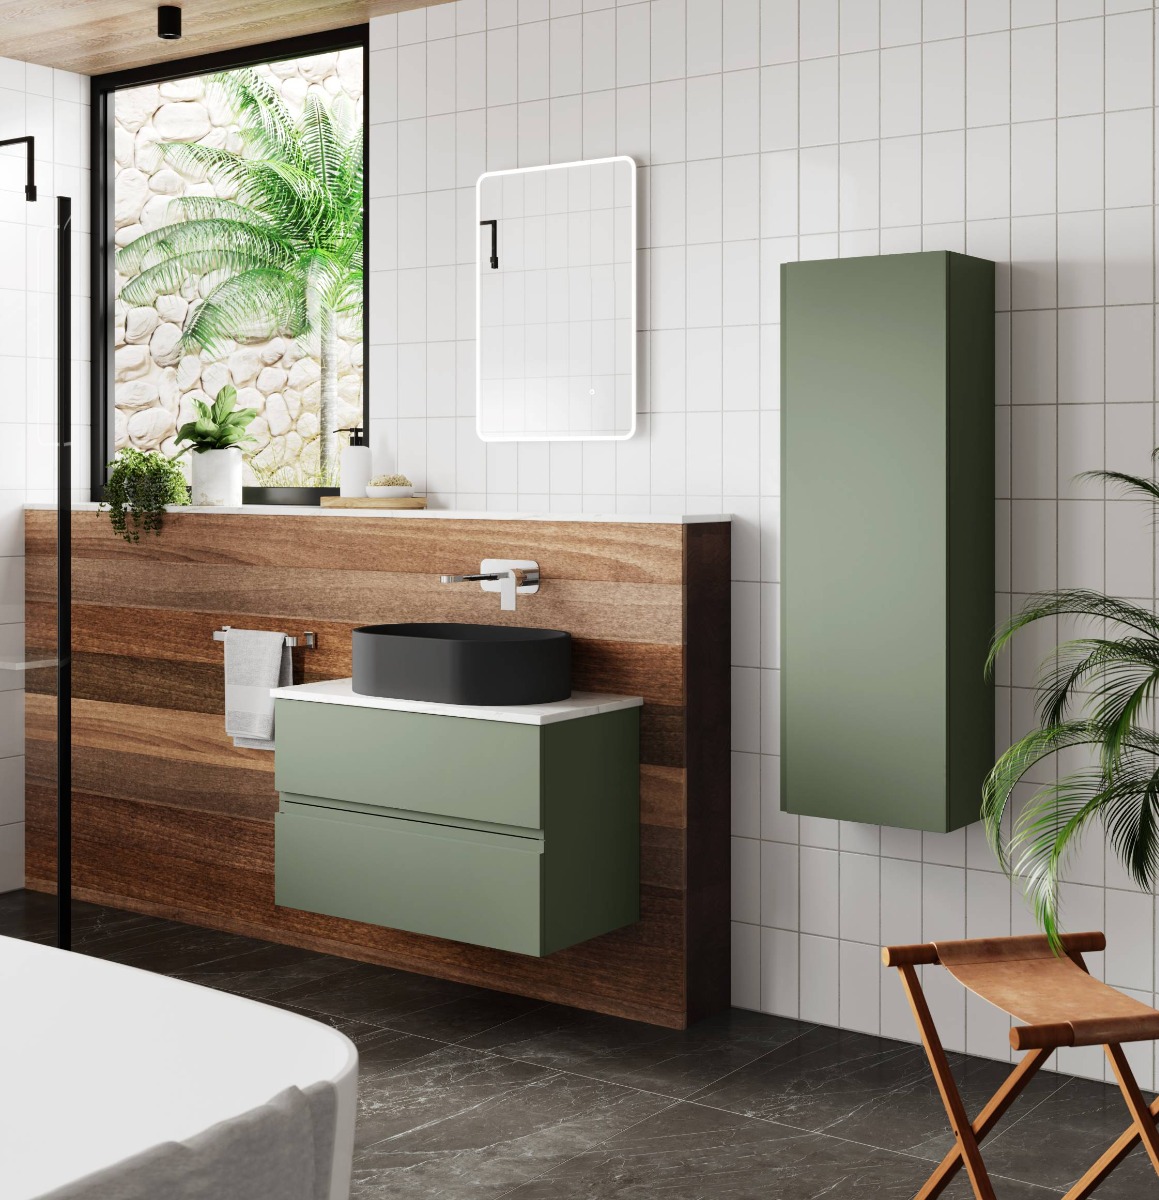 natural looking bathroom with green furniture and wooden panelling